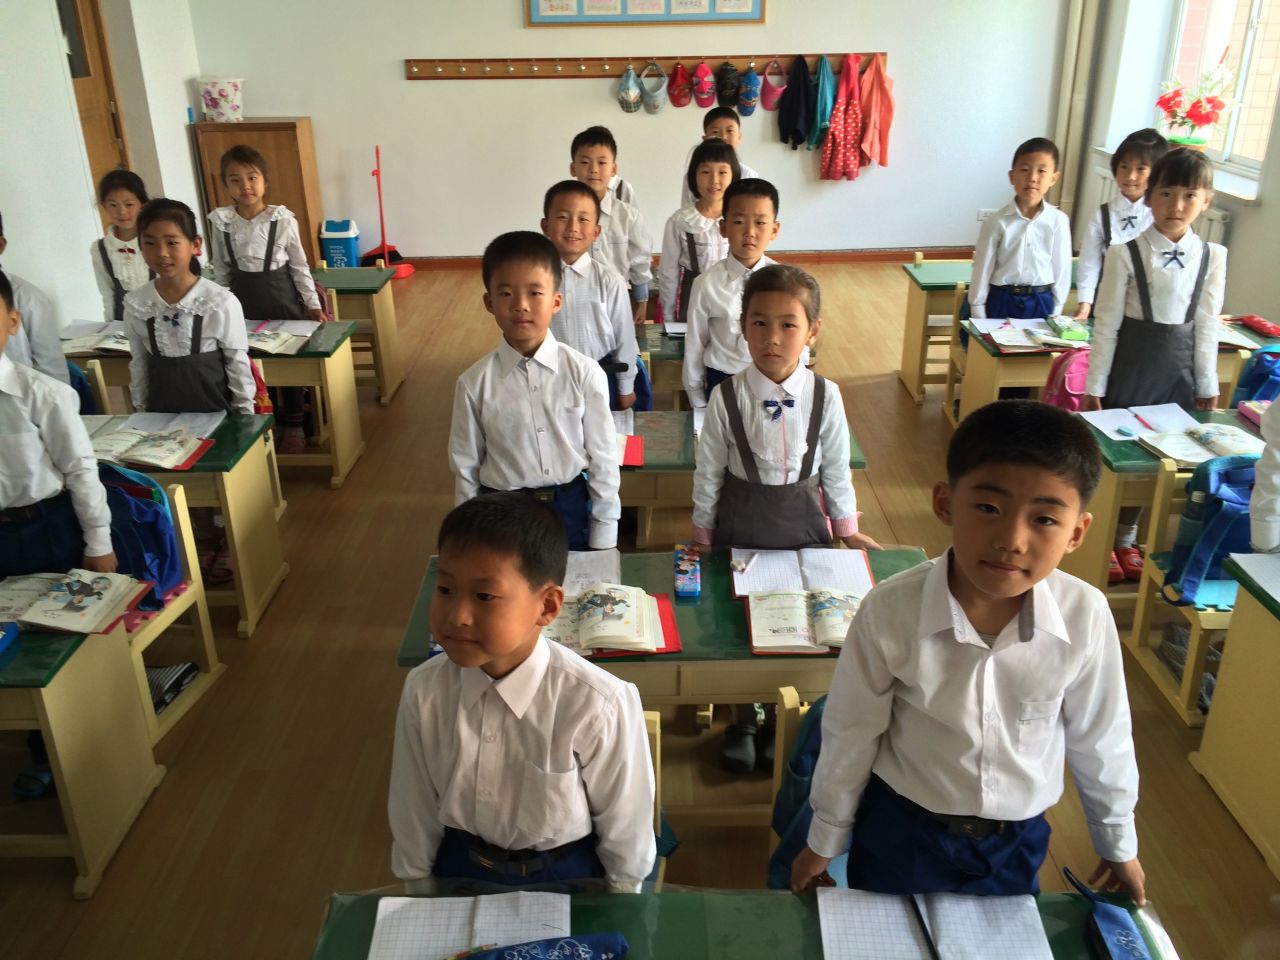 First graders in a Pyongyang classroom are orderly yet energetic, often standing and giving spirited answers to their teacher's questions.